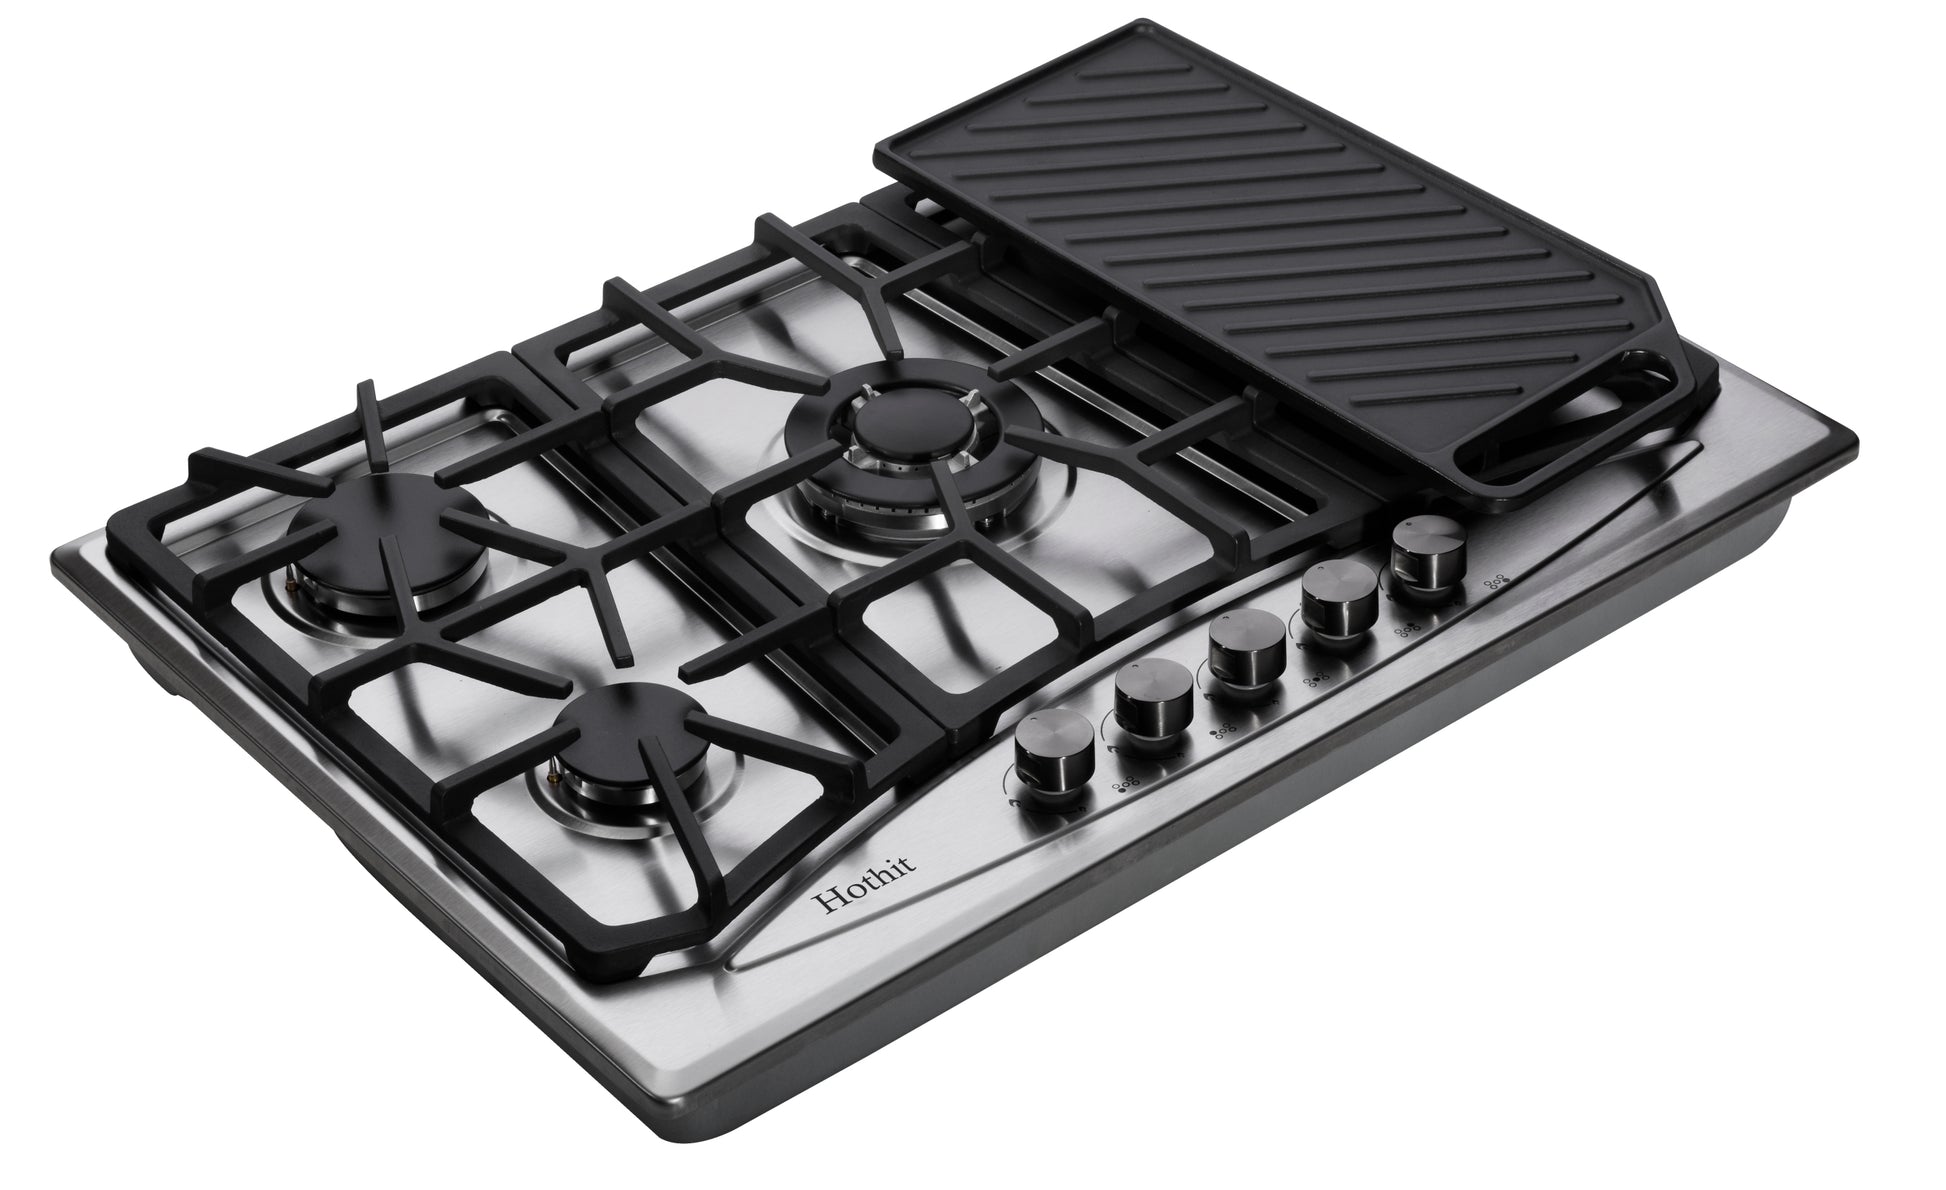 Aht30In20S Sd Kp Hothit Propane Gas Cooktop 30"